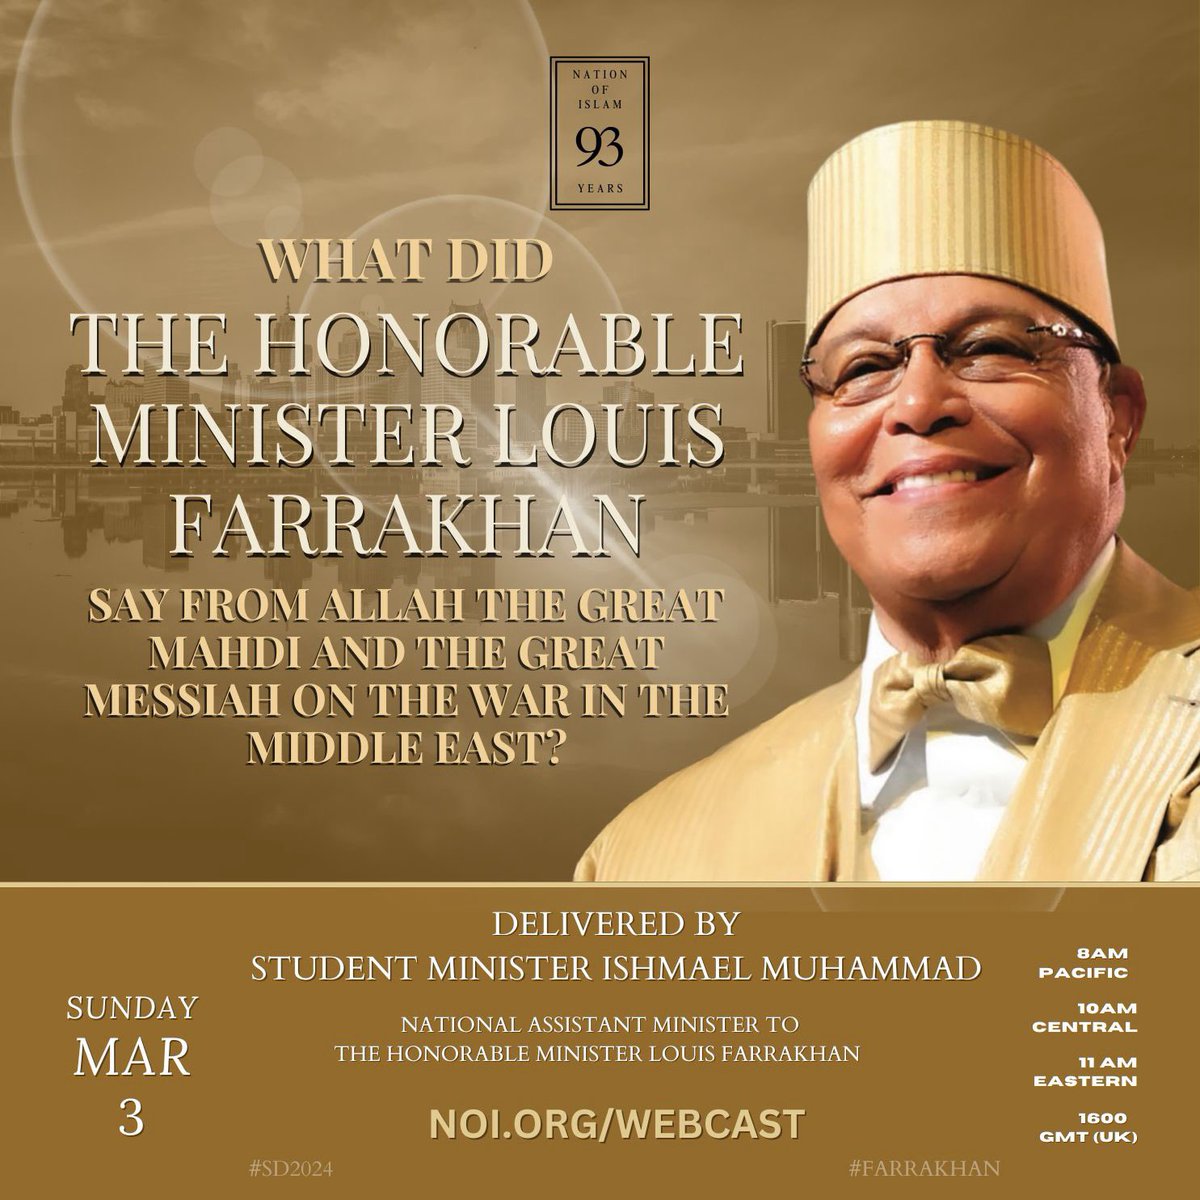 I look forward to us discussing the powerful Saviours’ Day message delivered by The Honorable Minister Louis Farrakhan! His message contained so much and we hope you can join us tomorrow at Mosque Maryam! Be our guest! #NOISundays #Farrakhan